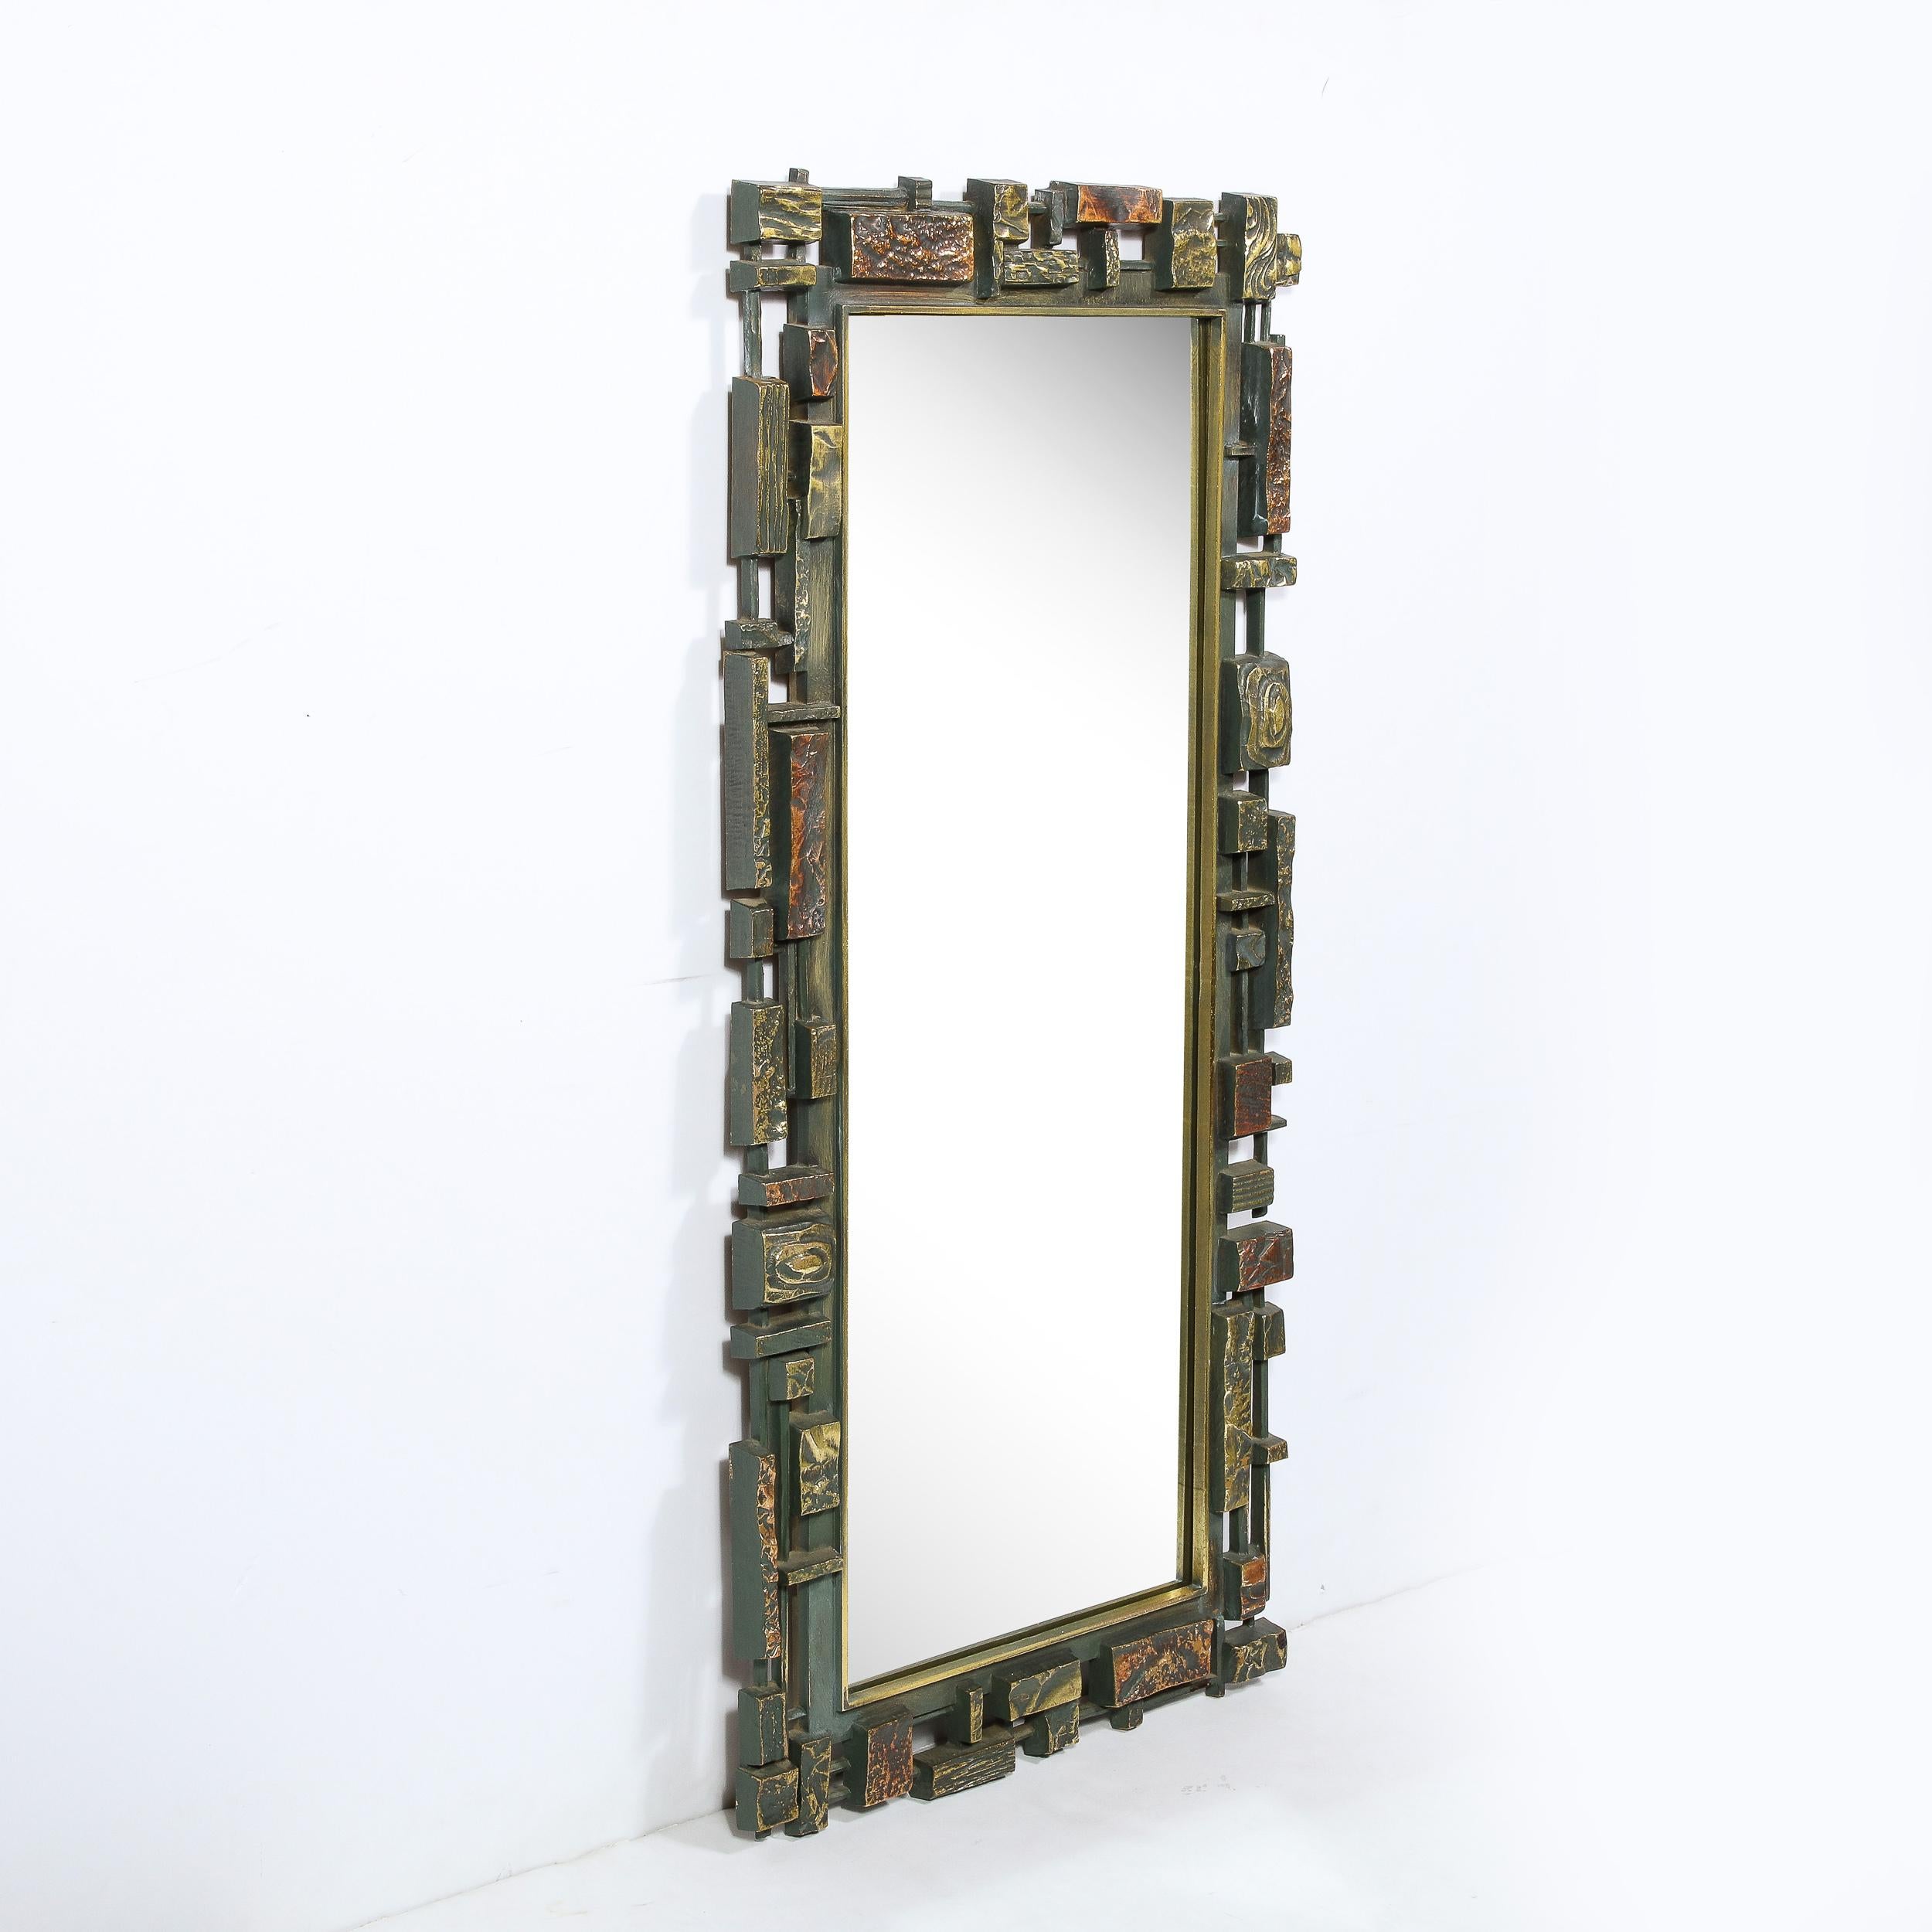 This graphic and sophisticated Mid Century Modern mirror was realized in the United States circa 1970. It features a rectangular plain mirror center surrounded by a mosaic of bronze and copper rectilinear forms presented at staggered heights and